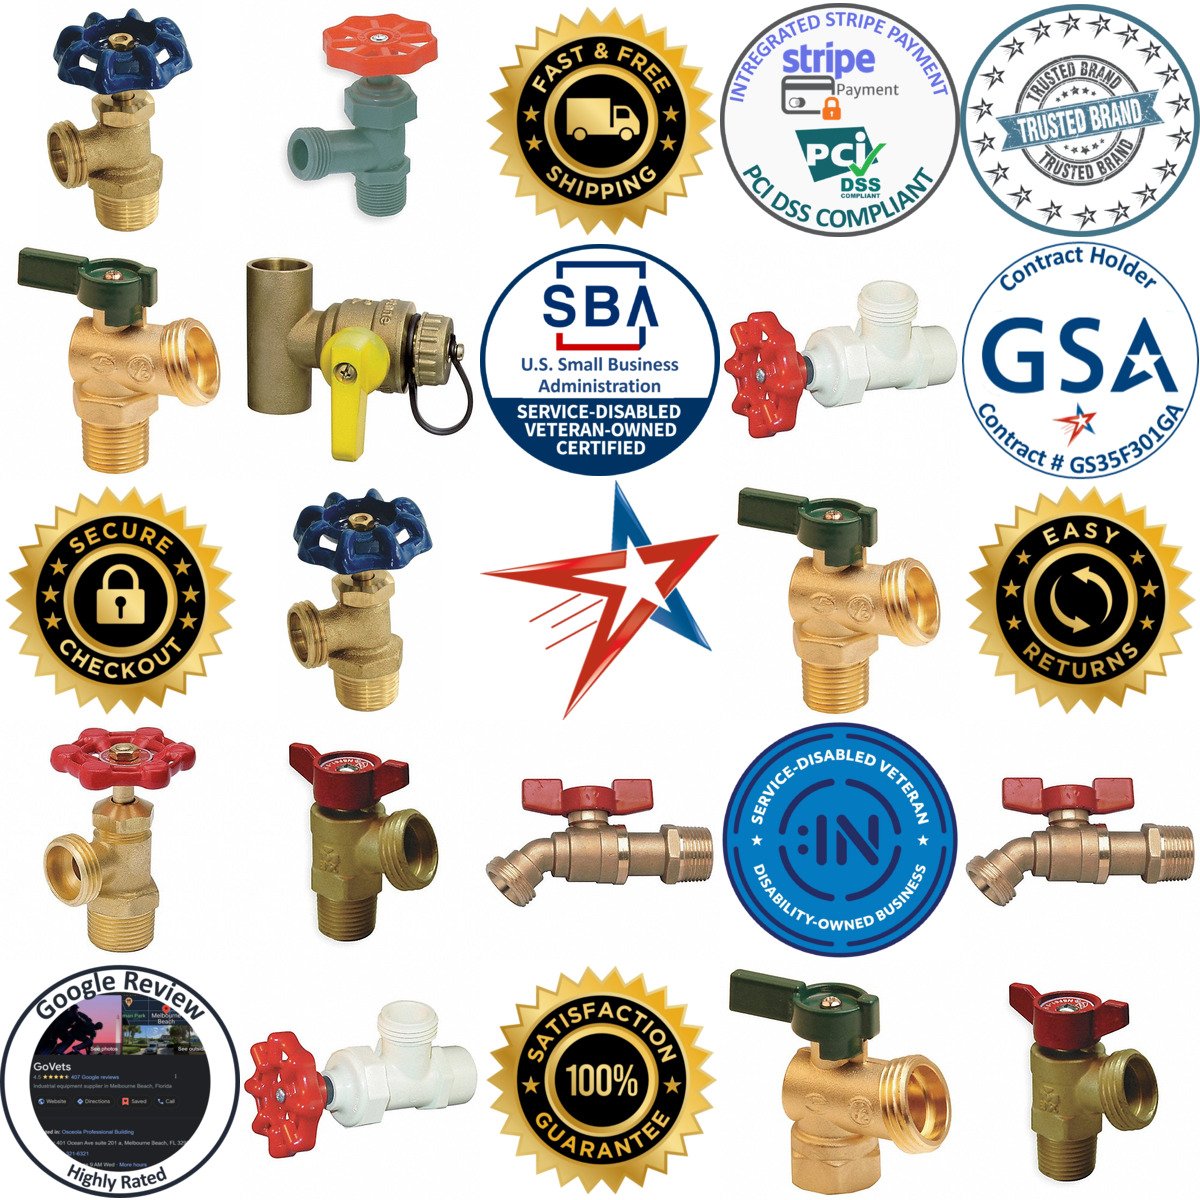 A selection of Boiler Drain Valves products on GoVets